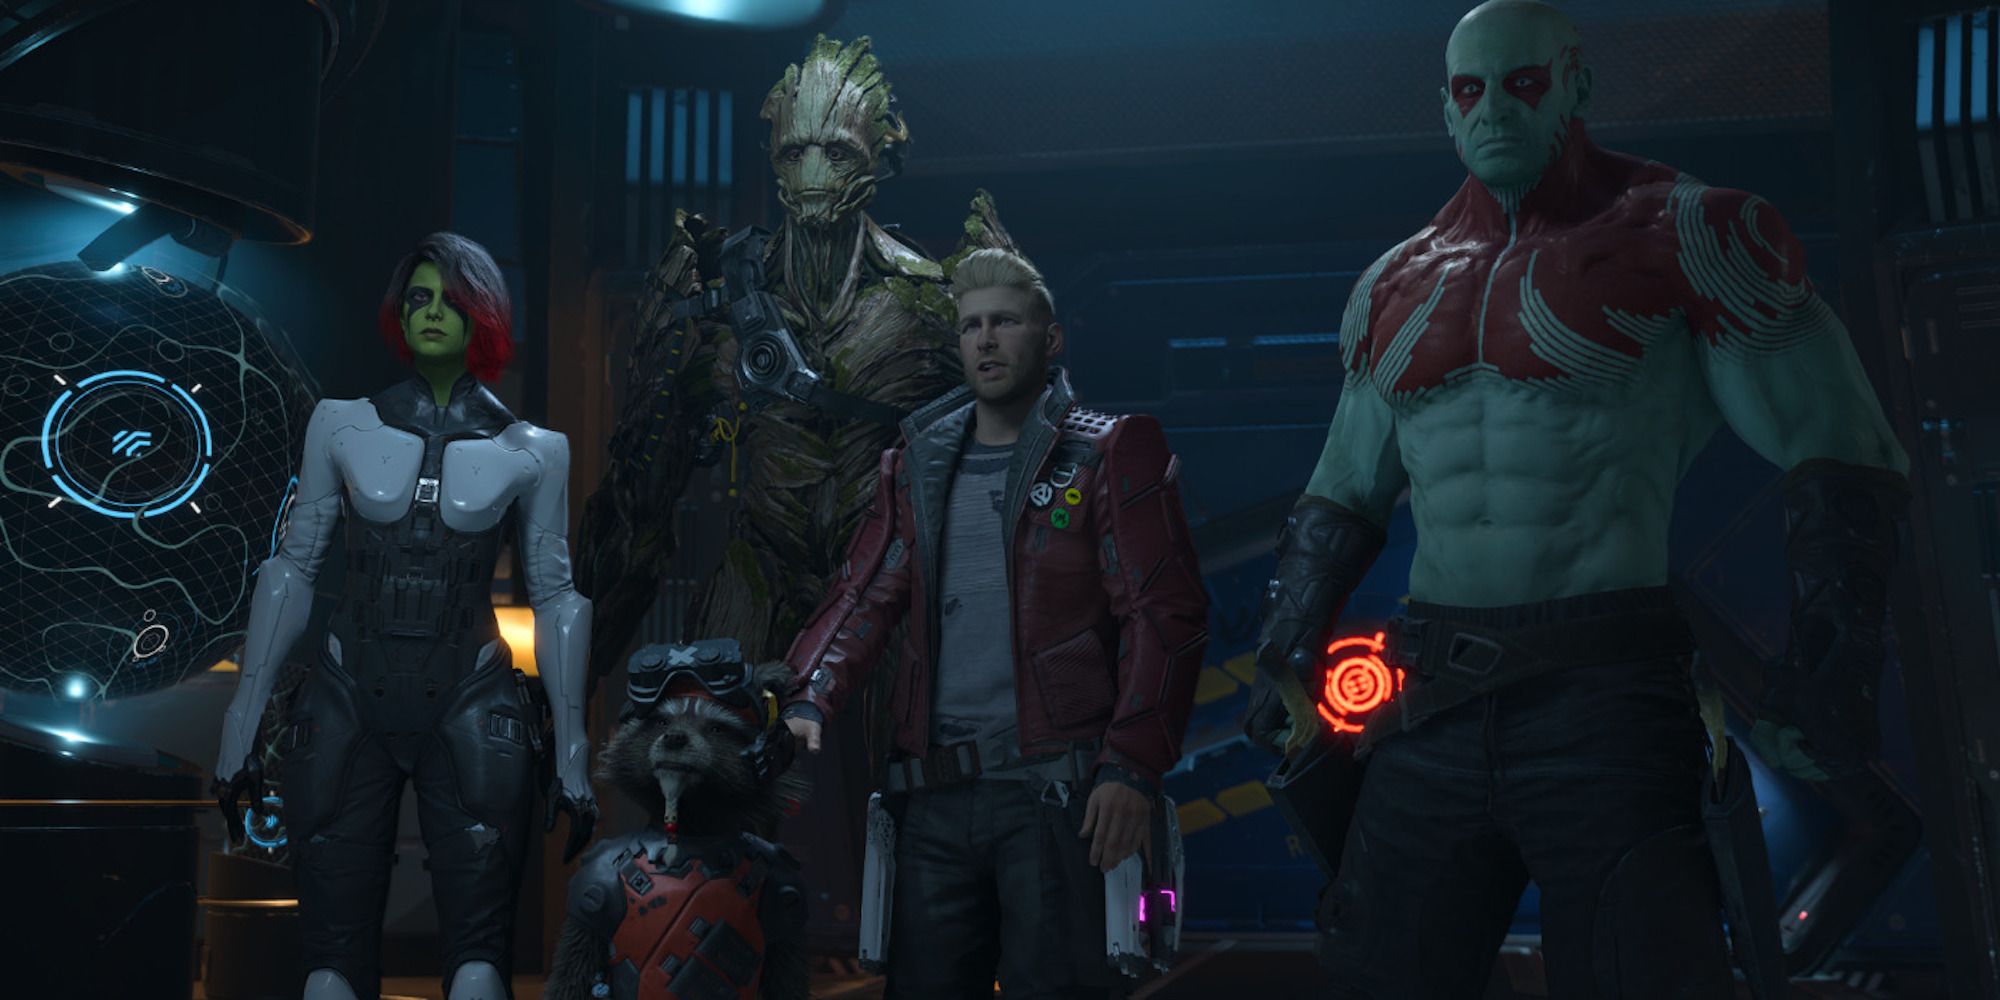 A cutscene featuring characters from Marvel’s Guardians of the Galaxy